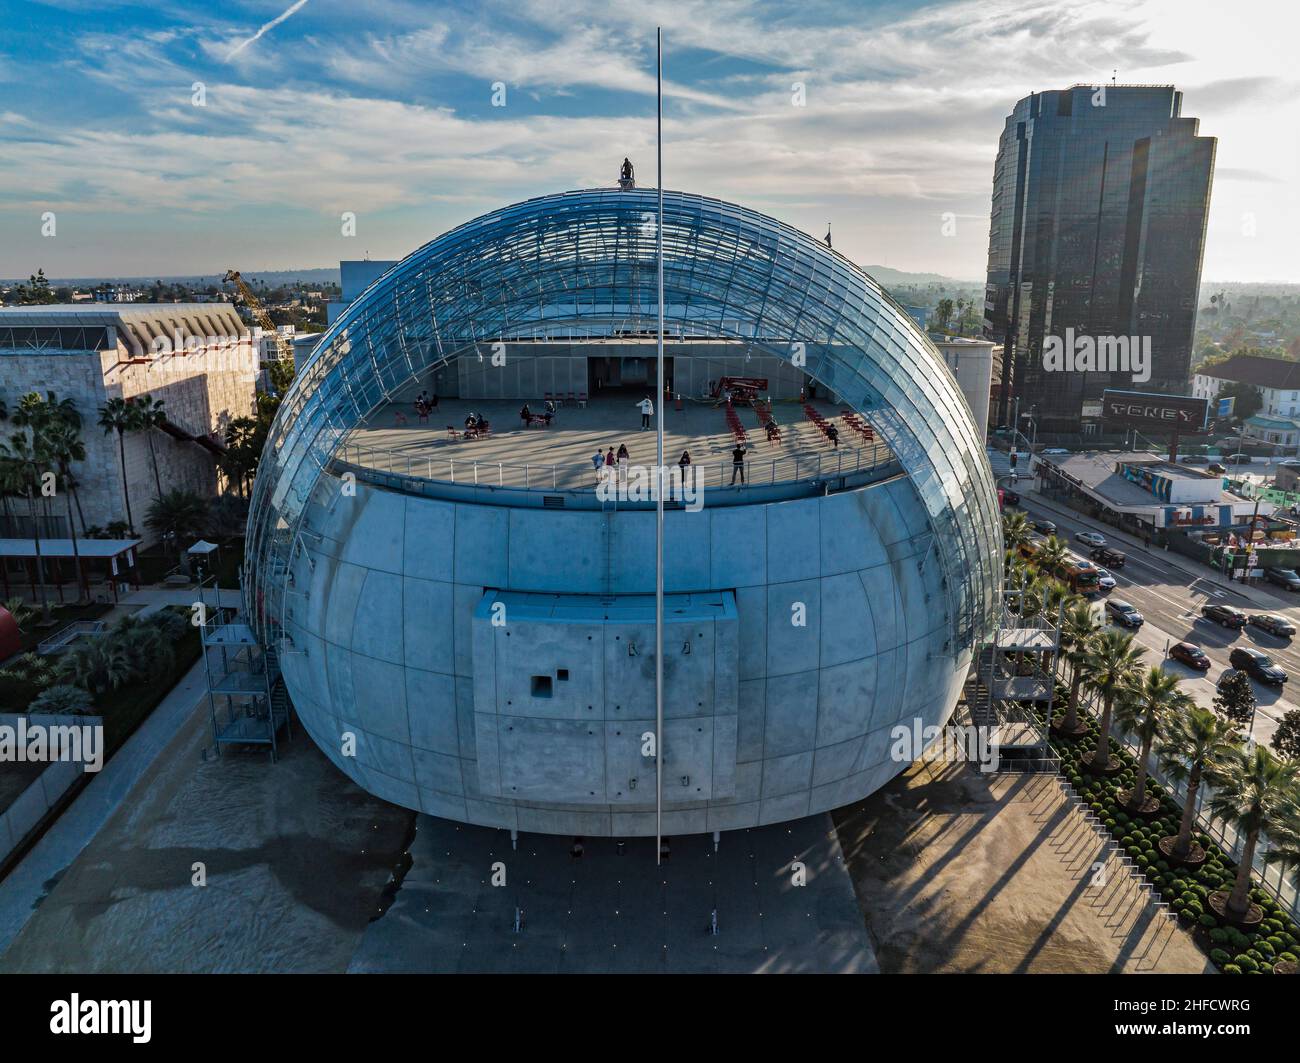 The Academy Museum of Motion Picture Arts Theater is now completed. The  spherical 1000 seat theater is named after David Geffen. It was designed by Renzo  Piano. 1/15/2021 Los Angeles, CA., USA (